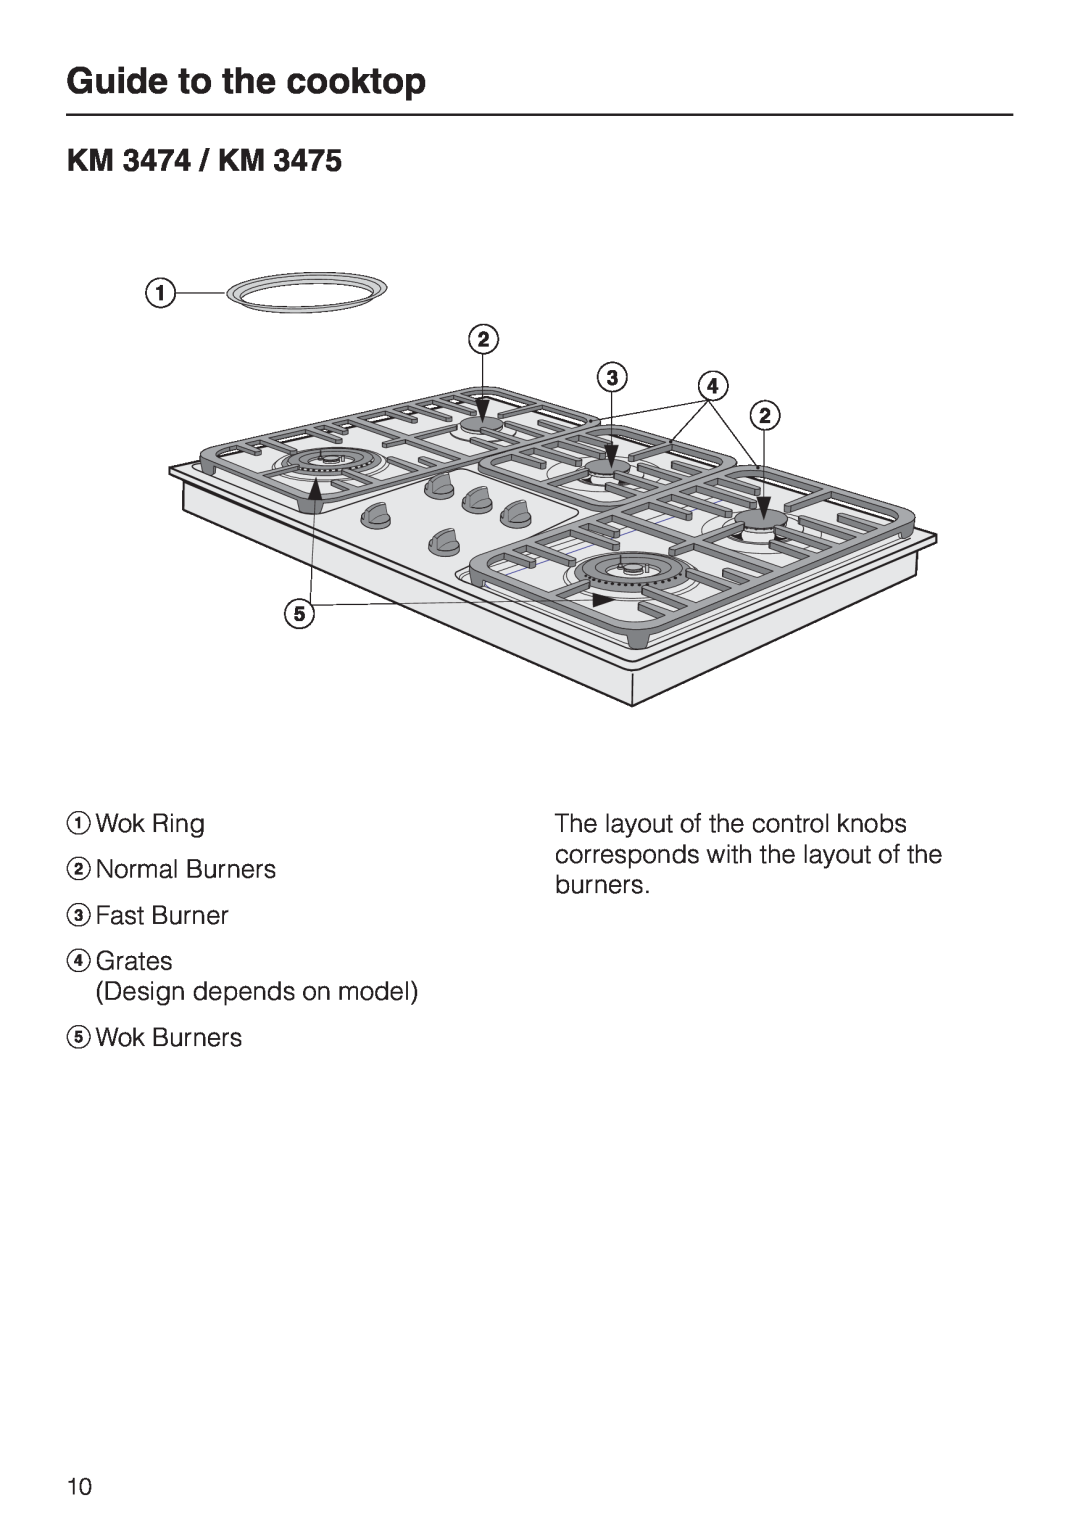 Miele KM 3485, KM 3484 KM 3474 / KM, Guide to the cooktop, a Wok Ring b Normal Burners c Fast Burner d Grates 